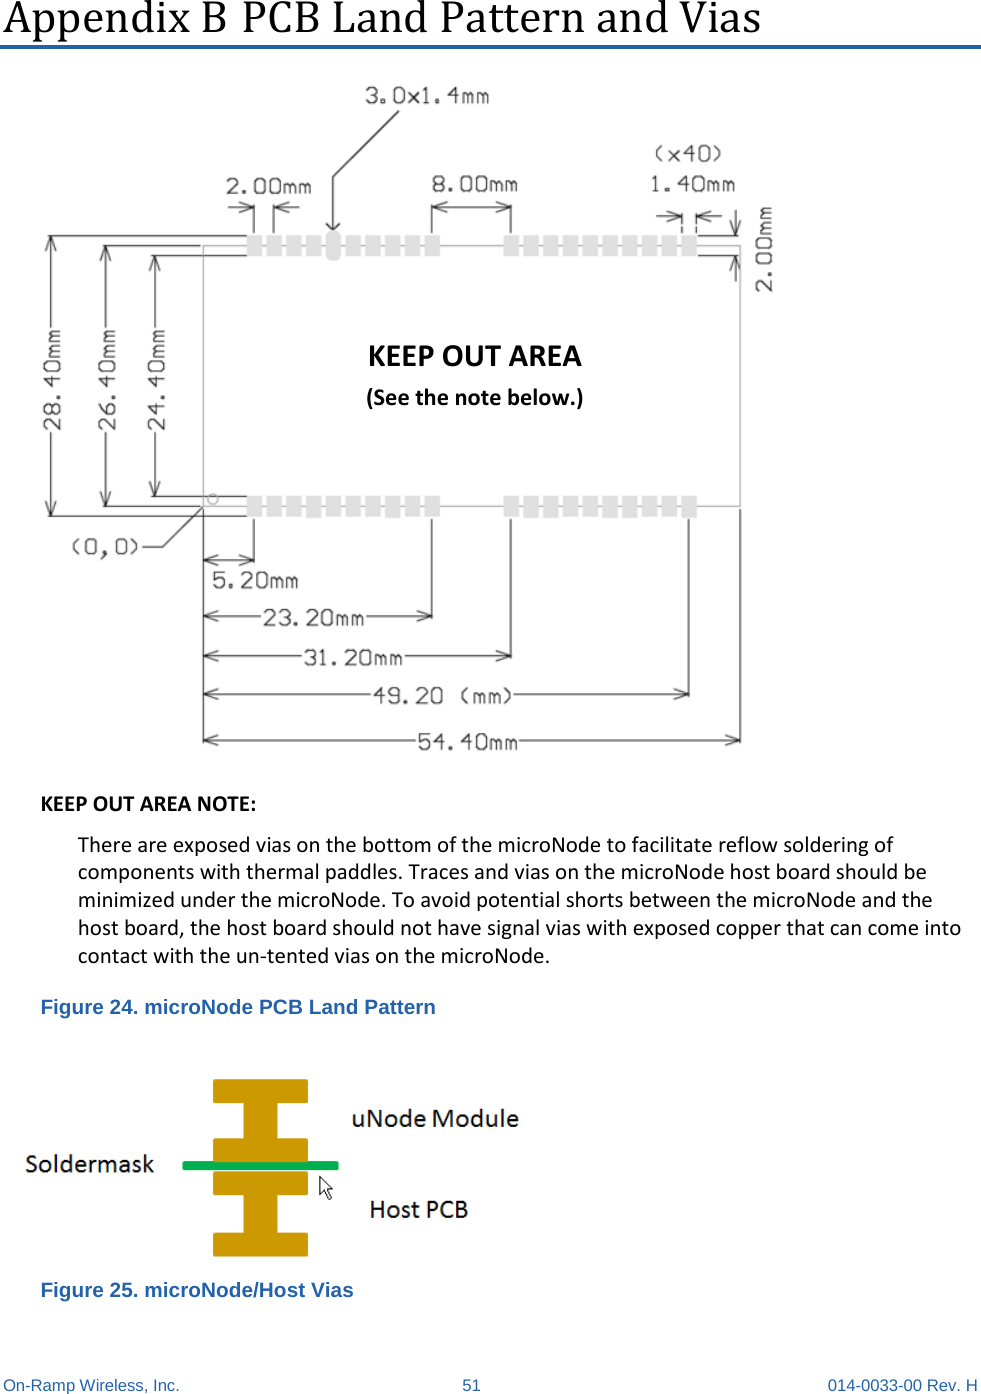  On-Ramp Wireless, Inc. 51 014-0033-00 Rev. H Appendix B PCB Land Pattern and Vias KEEP OUT AREA(See the note below.) KEEP OUT AREA NOTE: There are exposed vias on the bottom of the microNode to facilitate reflow soldering of components with thermal paddles. Traces and vias on the microNode host board should be minimized under the microNode. To avoid potential shorts between the microNode and the host board, the host board should not have signal vias with exposed copper that can come into contact with the un-tented vias on the microNode. Figure 24. microNode PCB Land Pattern  Figure 25. microNode/Host Vias   